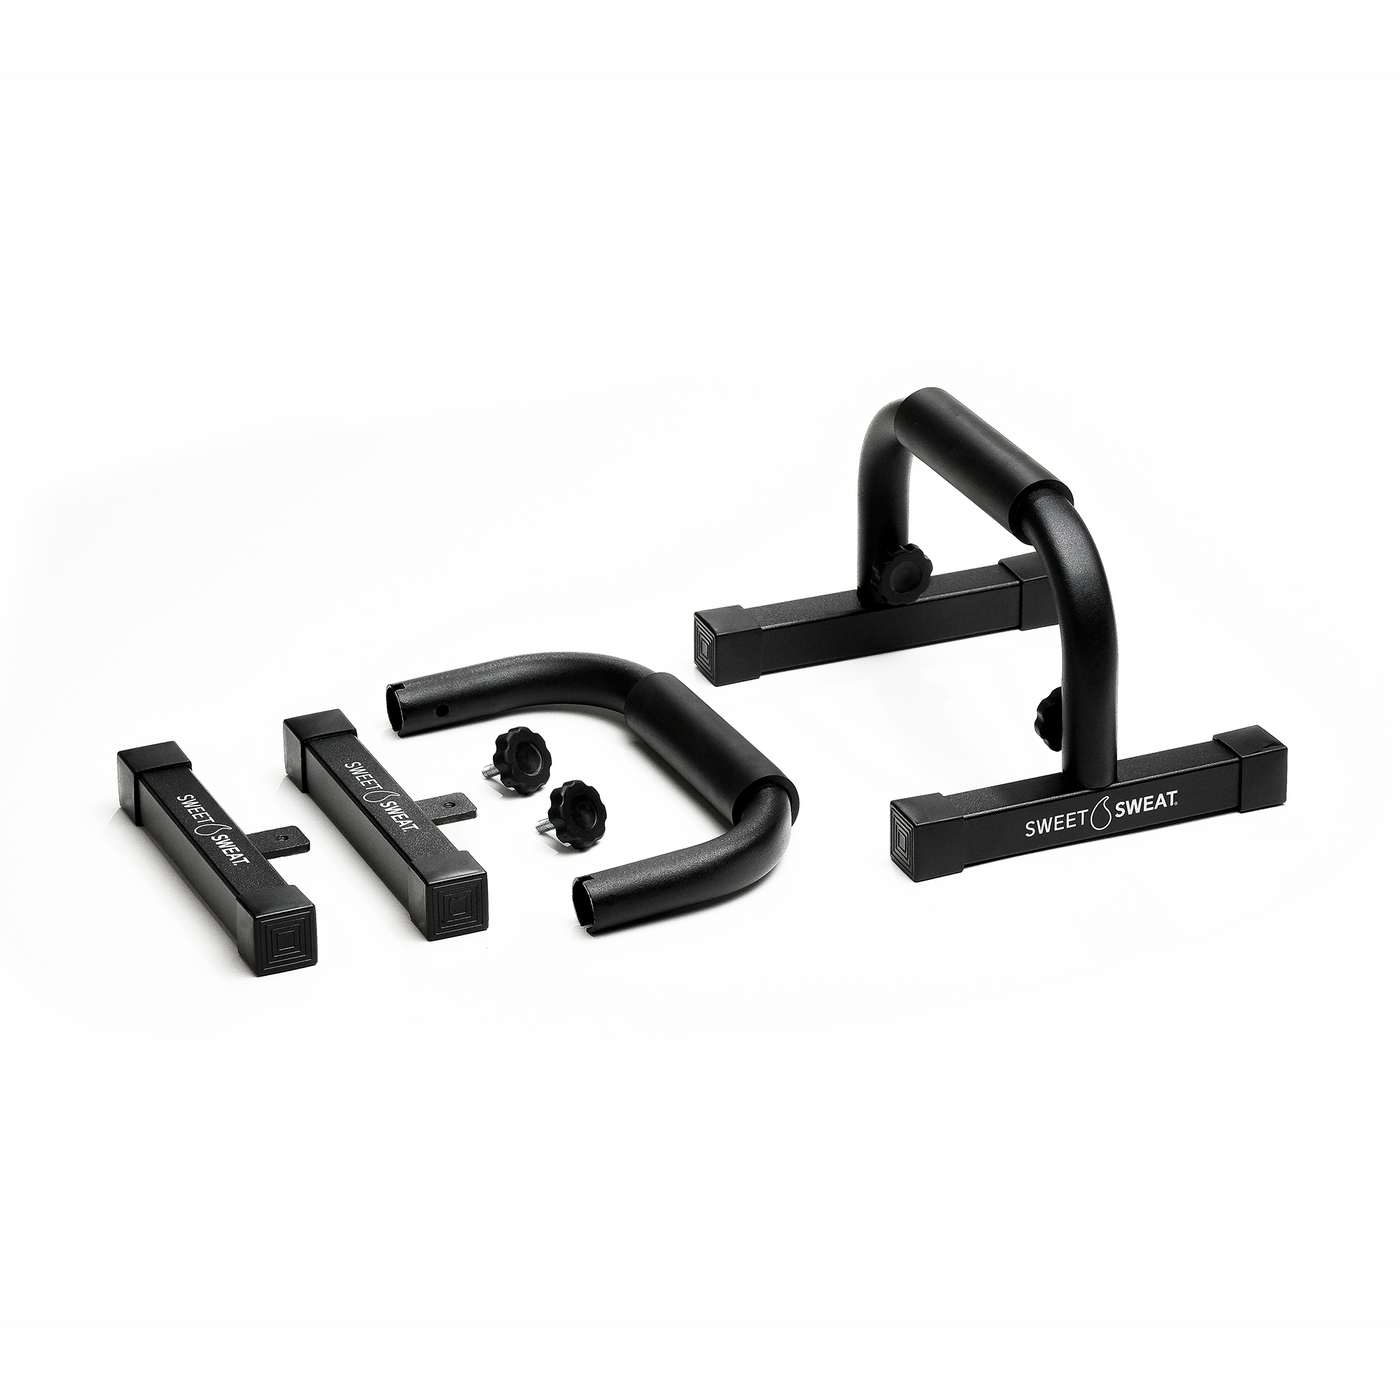 Sweet Sweat Push Up Bars 2 pack, black in color with white logo. One fully assembled, one disassembled.